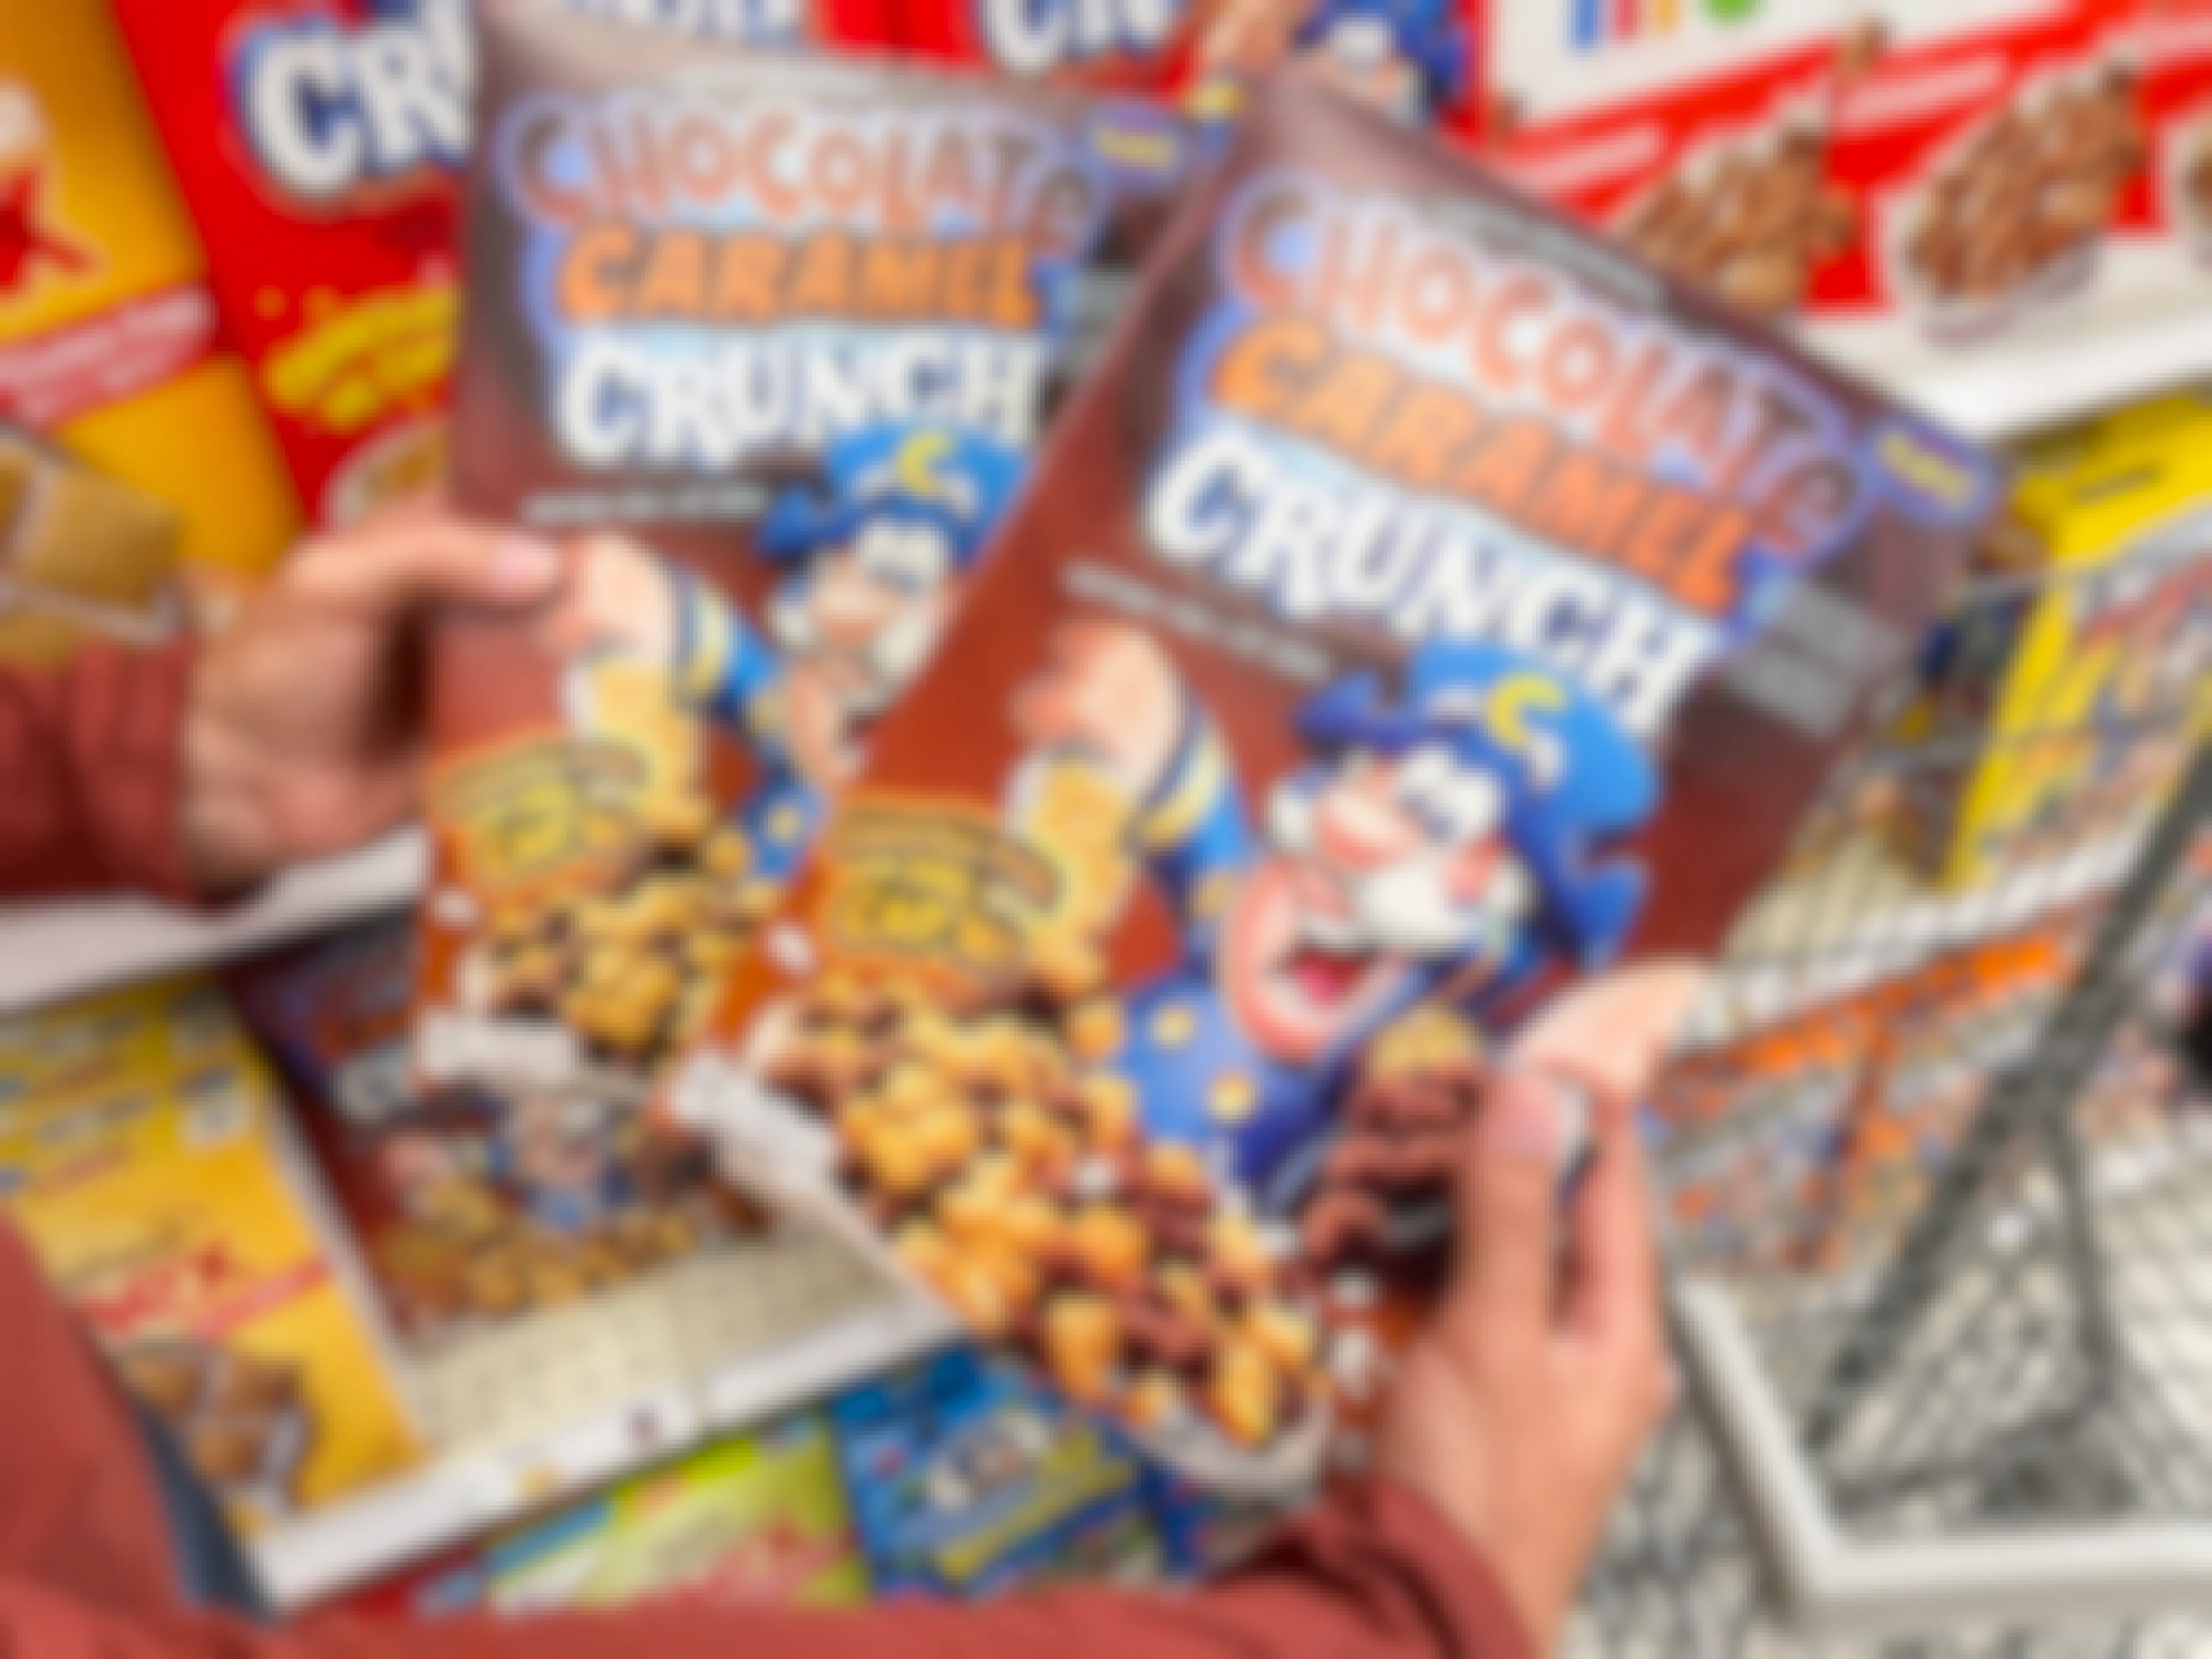 a person holding two boxes of capn crunch in store